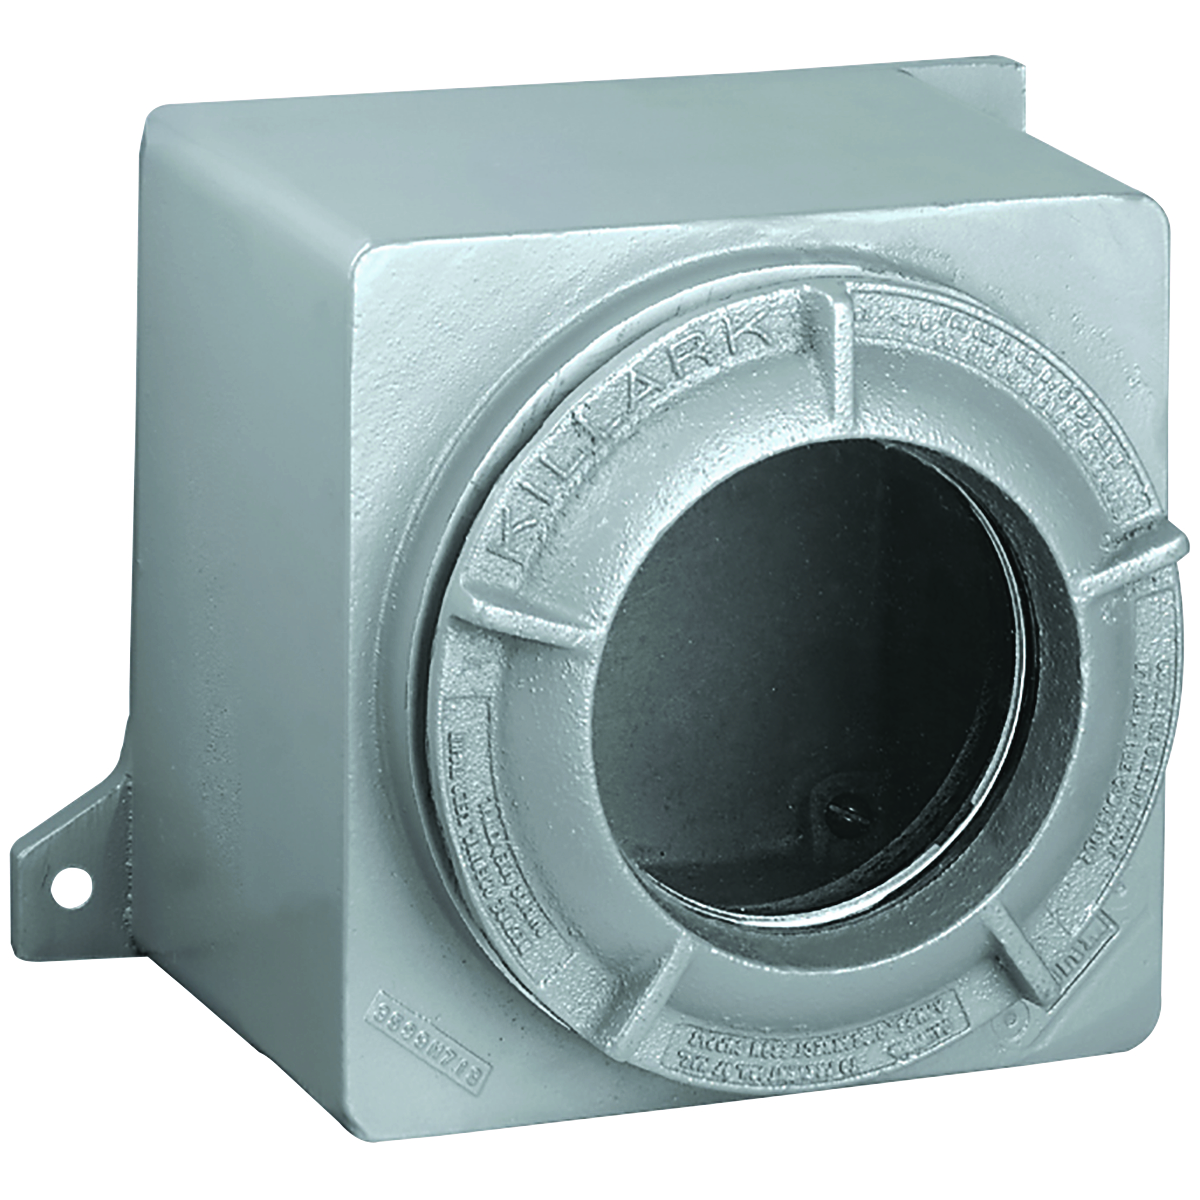 GRM SERIES - THREADED BOX WITH LENS COVER - COVER OPENING DIAMTER 5-9/32IN - VIEWING AREA 3-3/4 IN - MAXIMUM CONDUIT SIZE 2 IN